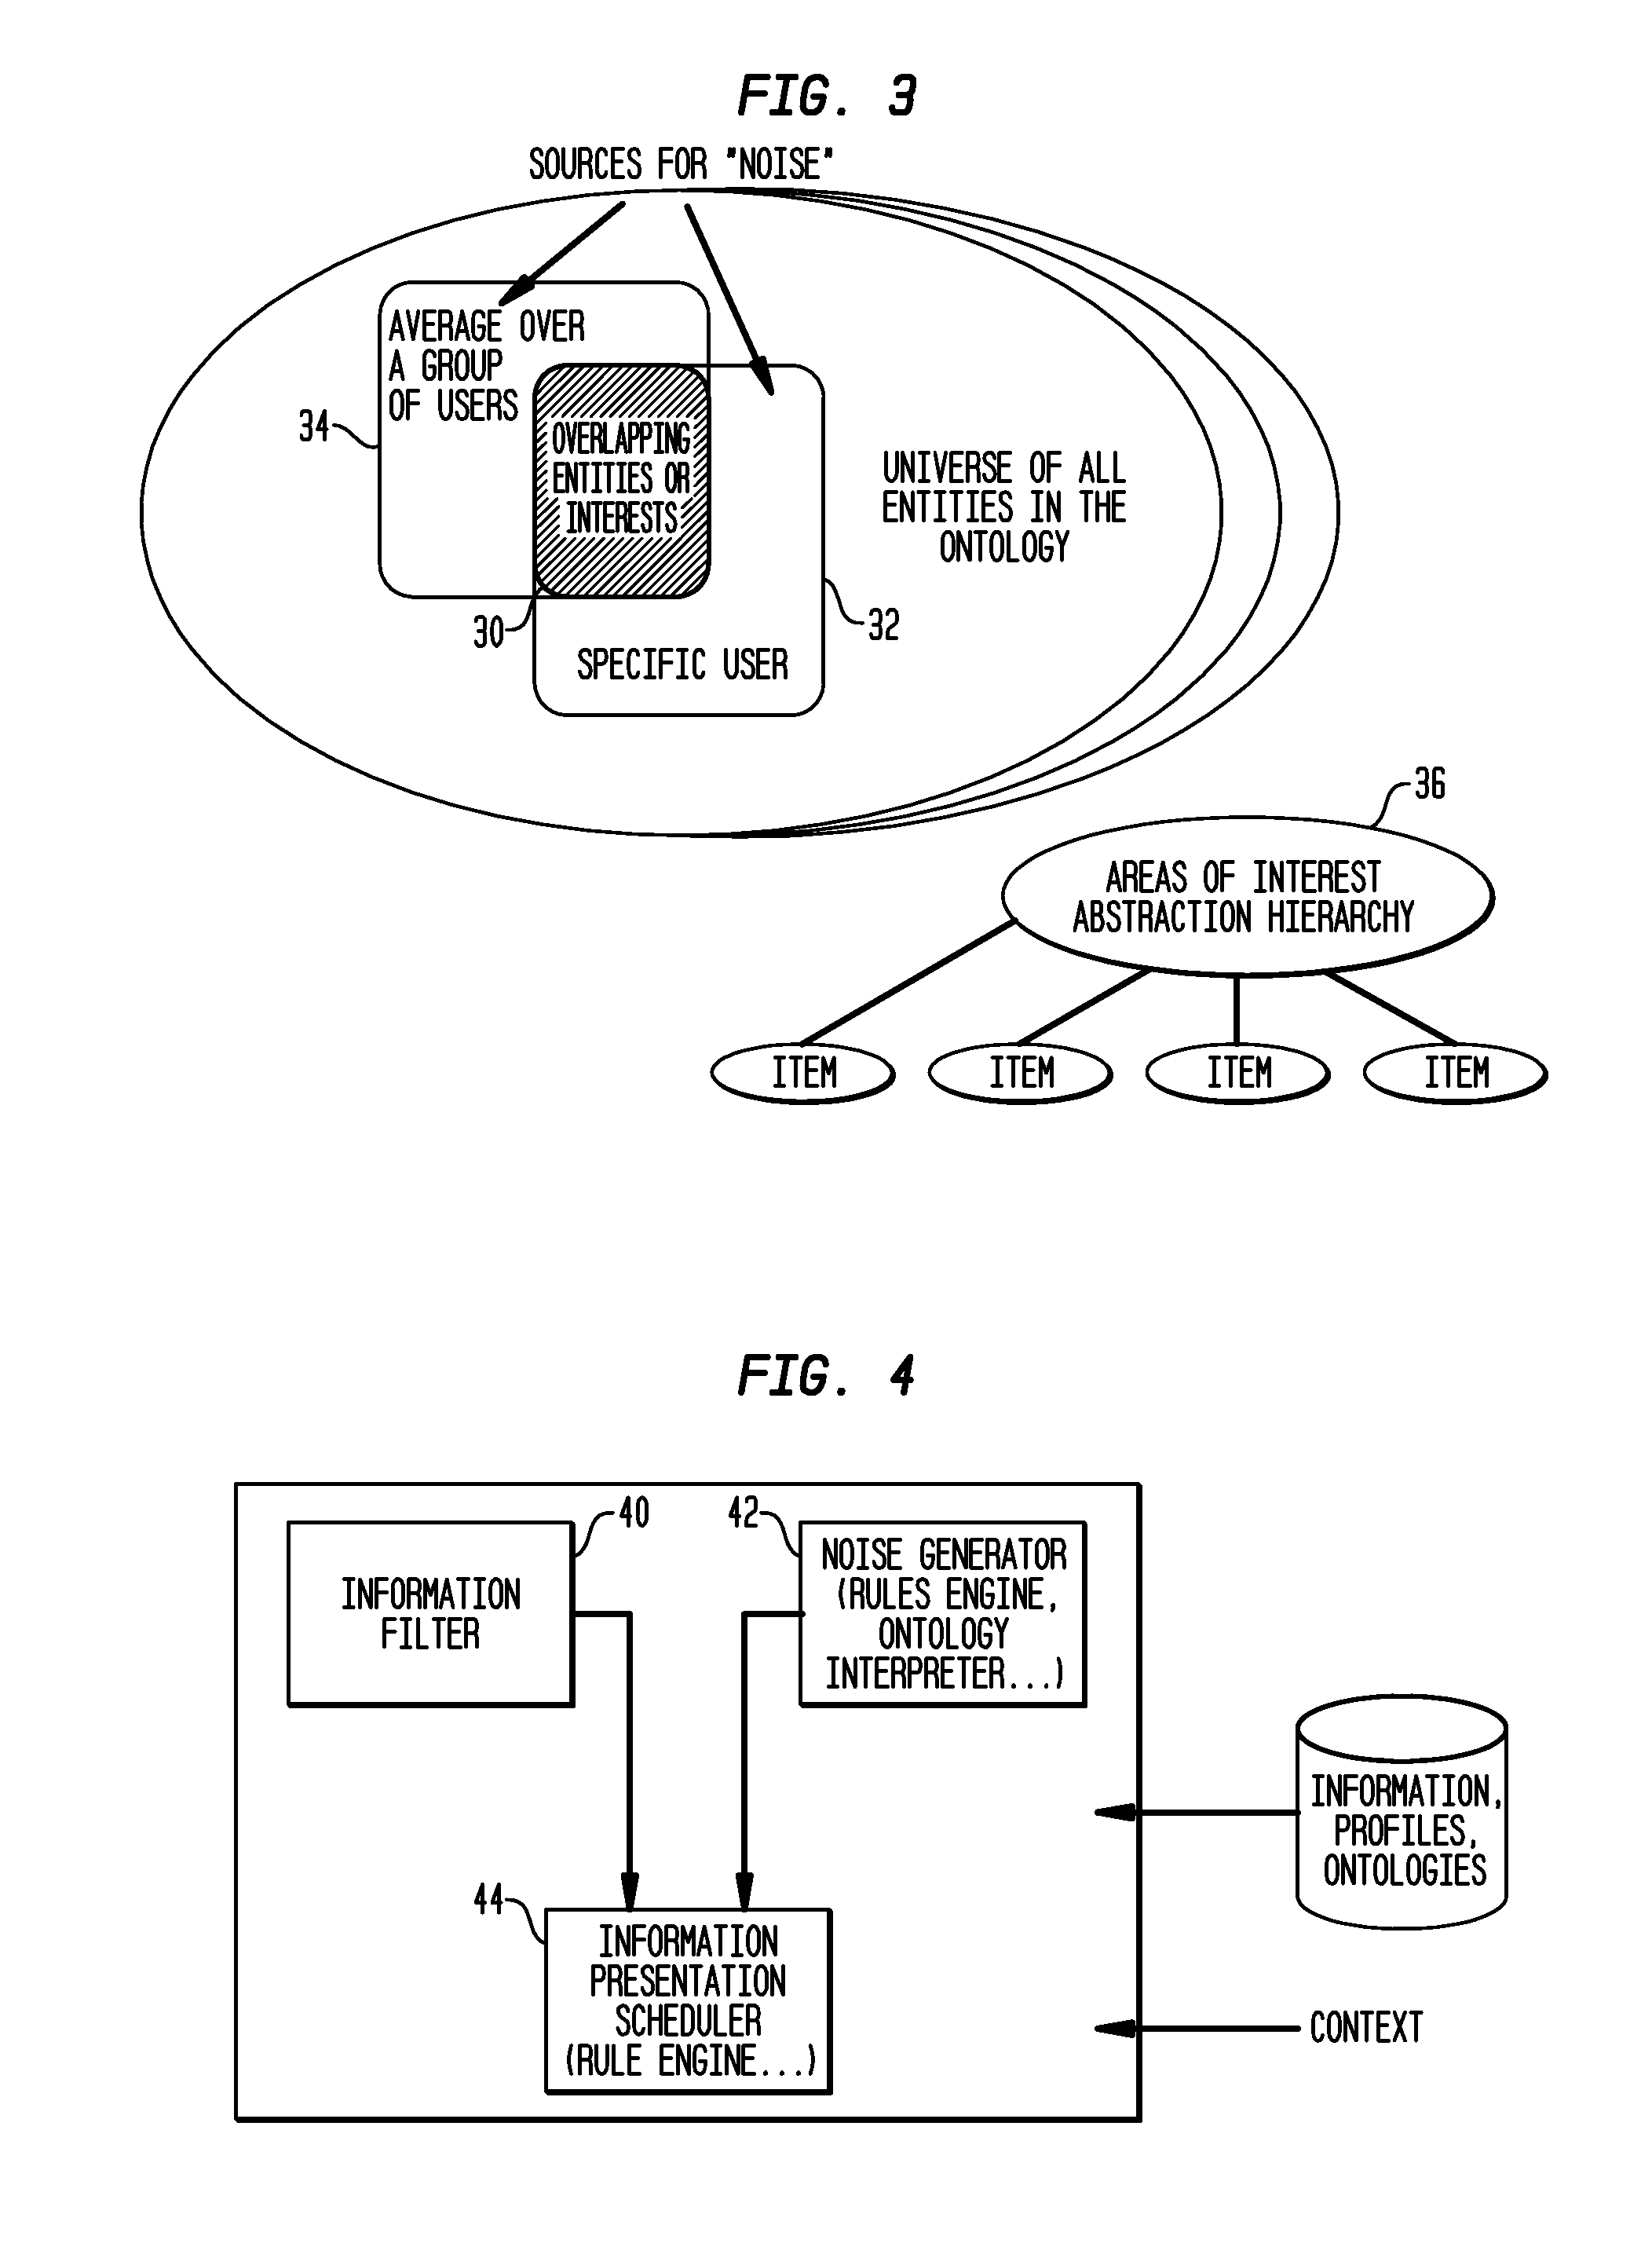 System and method for the controlled introduction of noise to information filtering